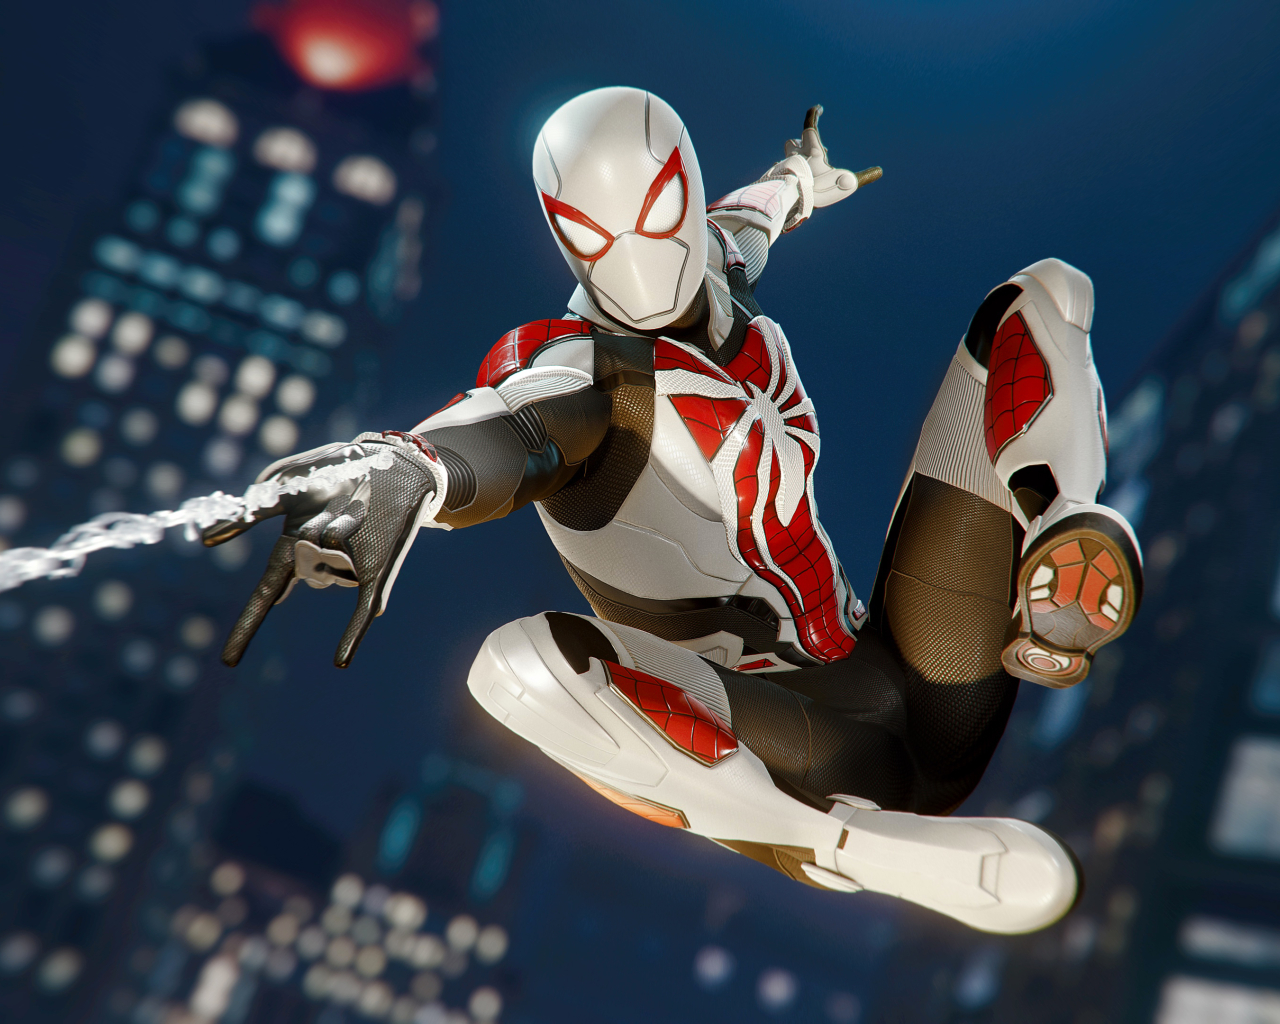 1280x1024 Resolution Miles Morales Spider Man White Suit 1280x1024